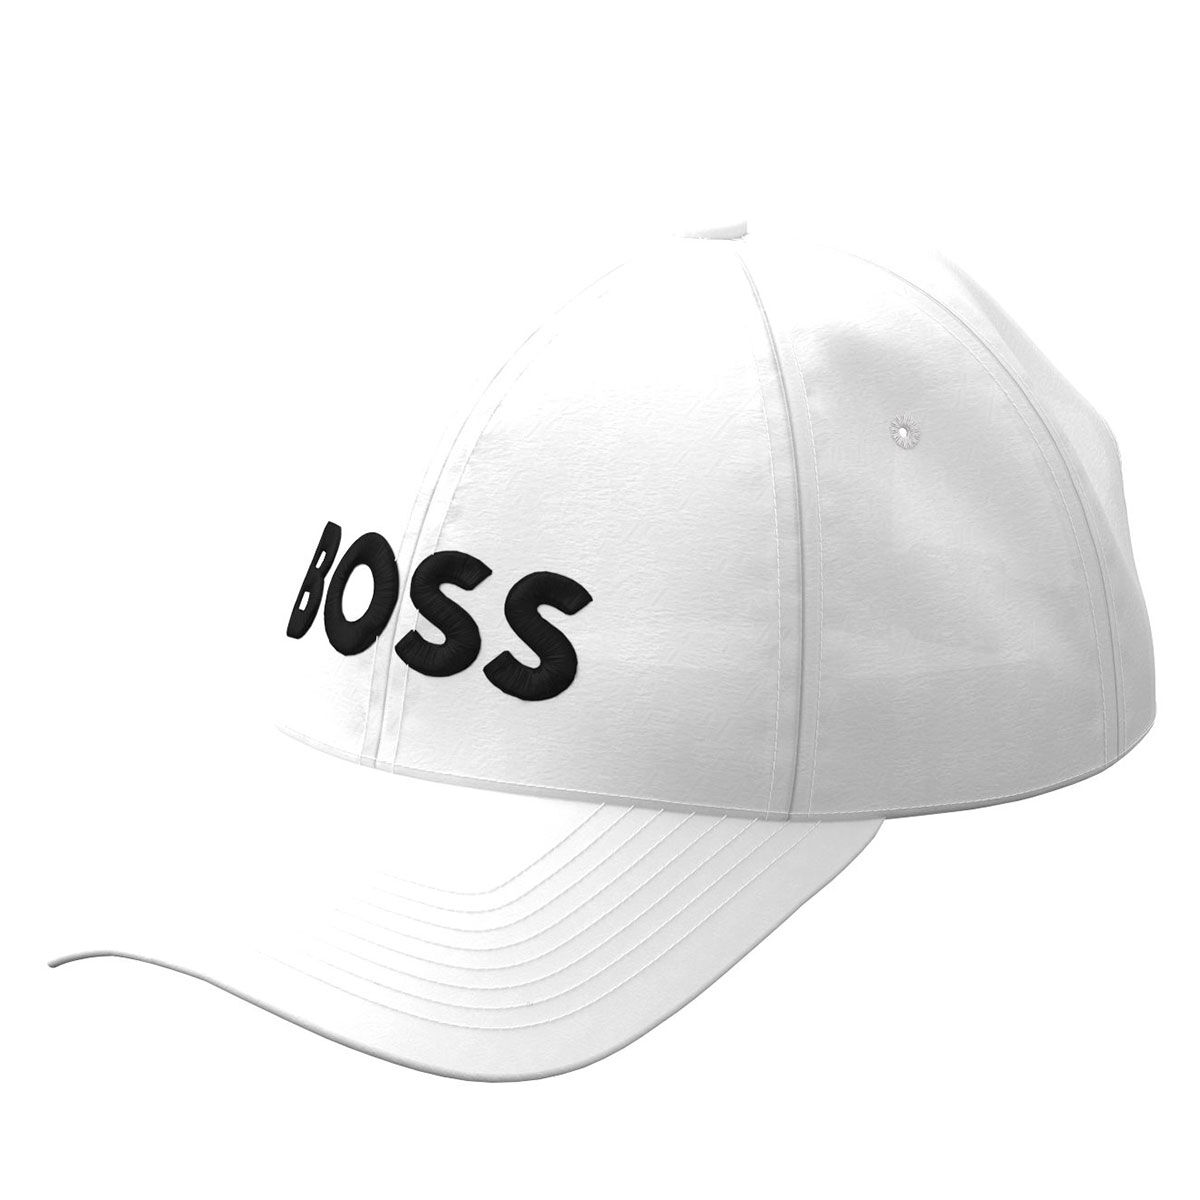 Hugo Boss Mens White Adjustable Embroidered Golf Cap | American Golf, One Size